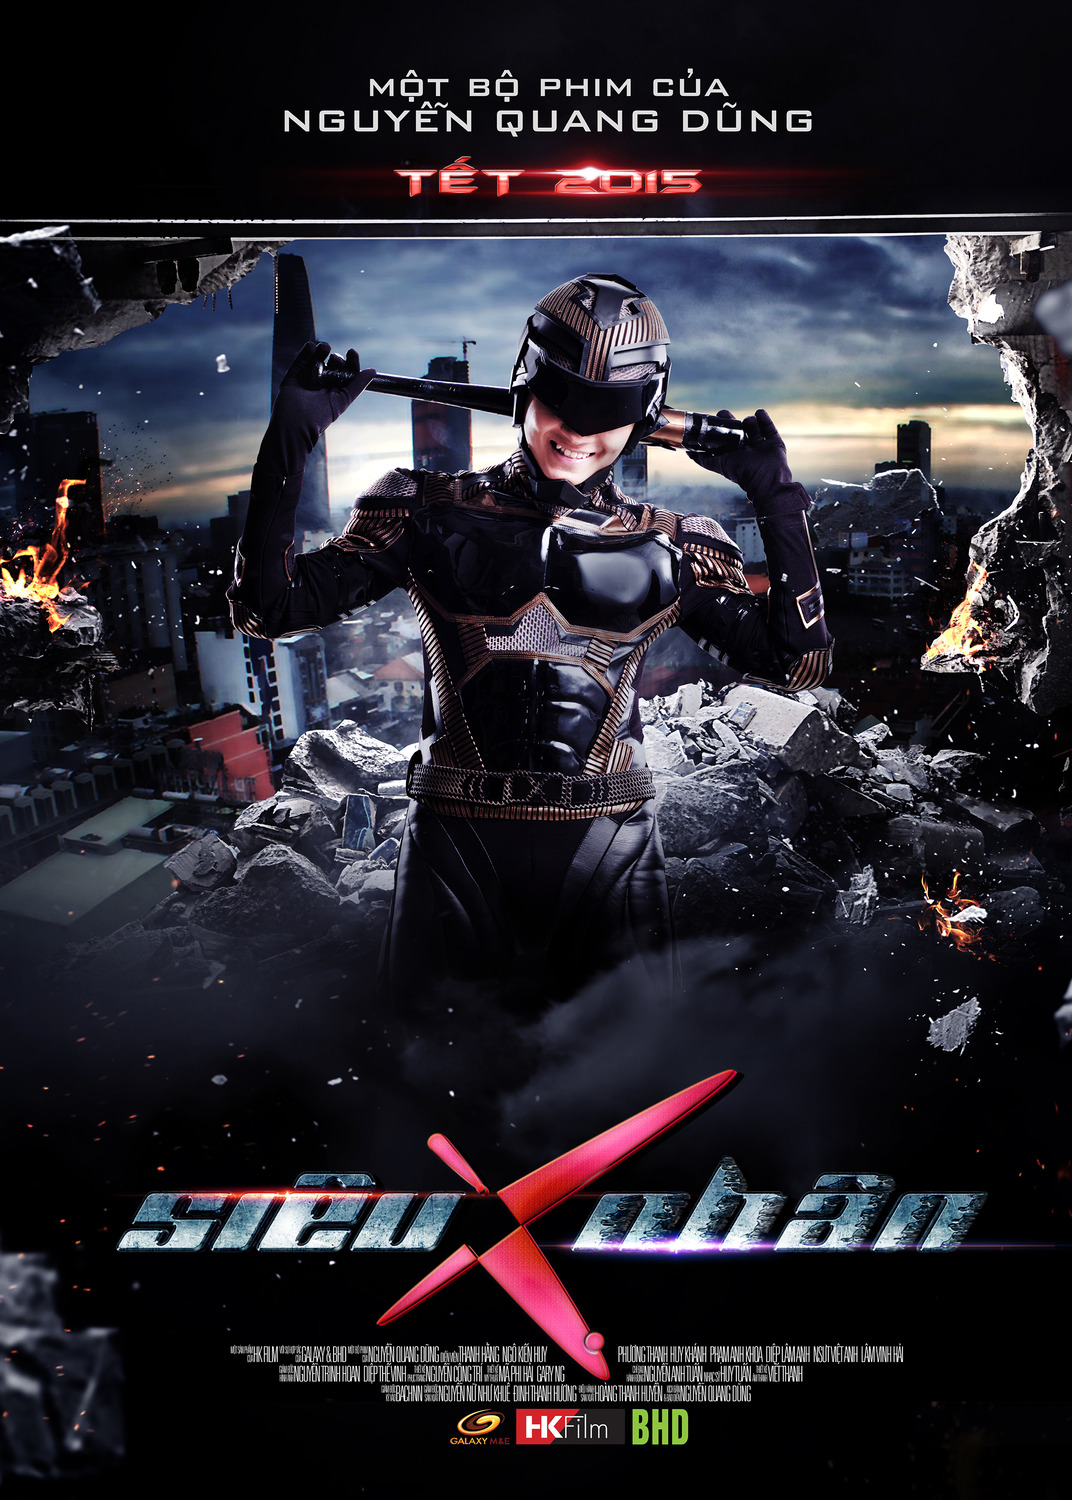 Extra Large Movie Poster Image for Sieu Nhan X: Super X (#5 of 8)